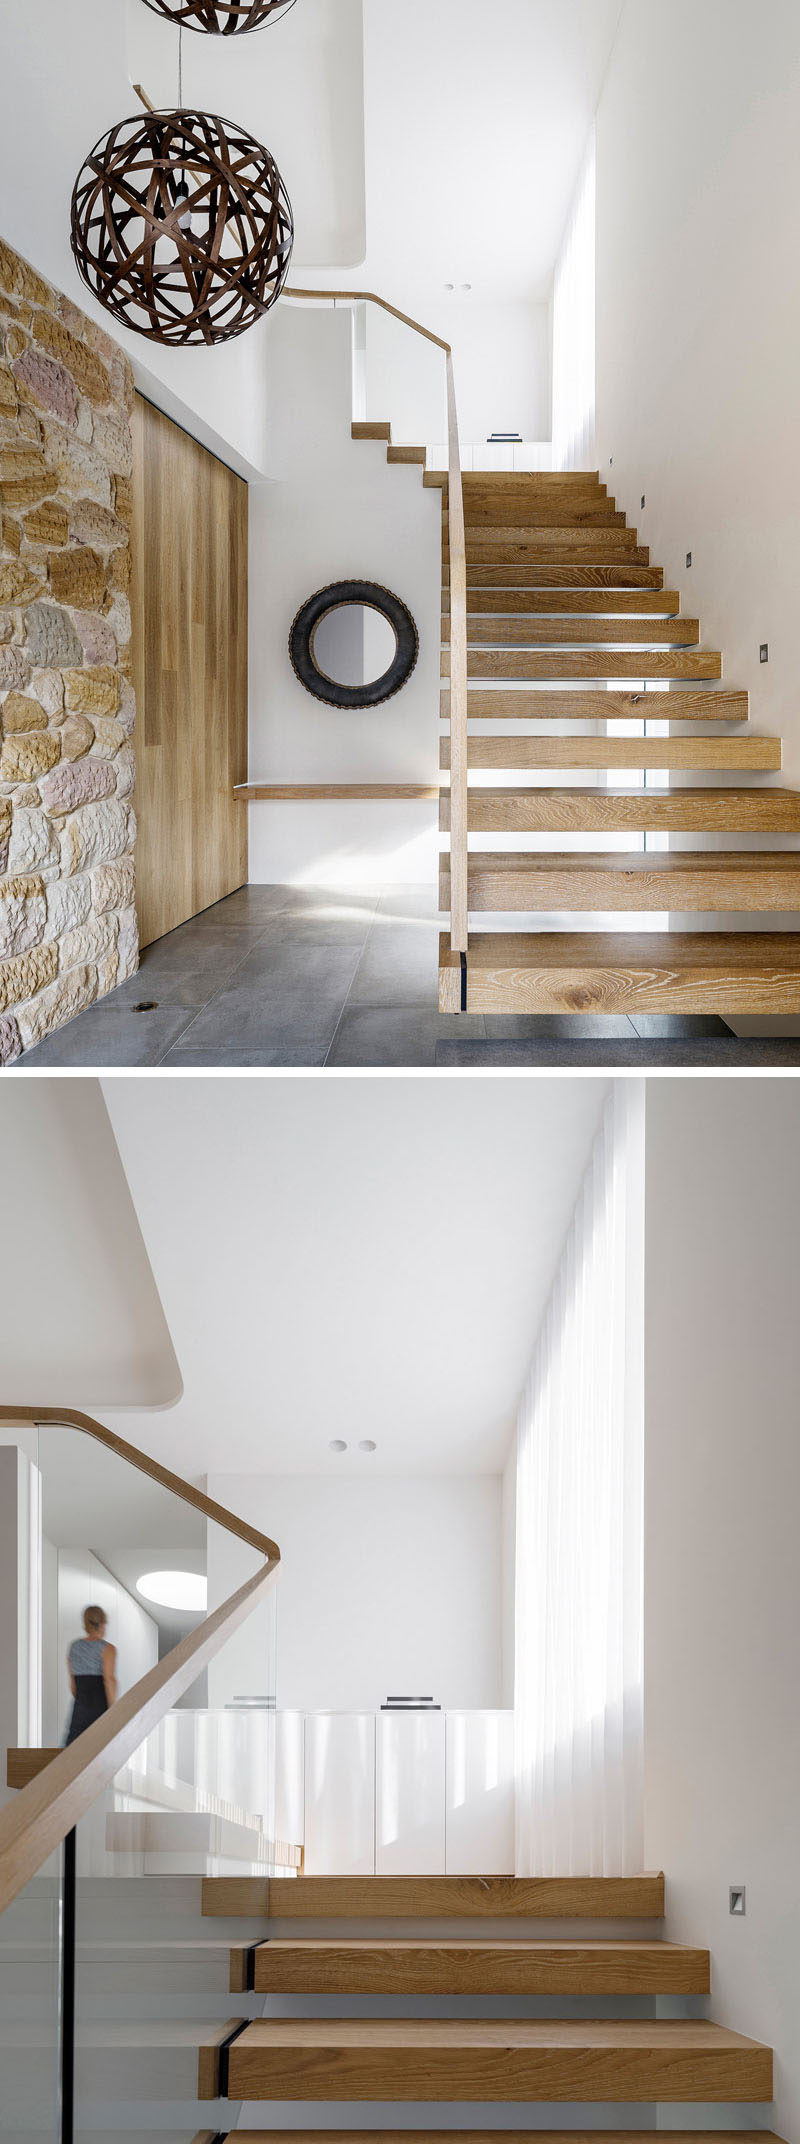 To the left of these modern wood and glass stairs is a recycled sandstone wall and large sliding wood door.